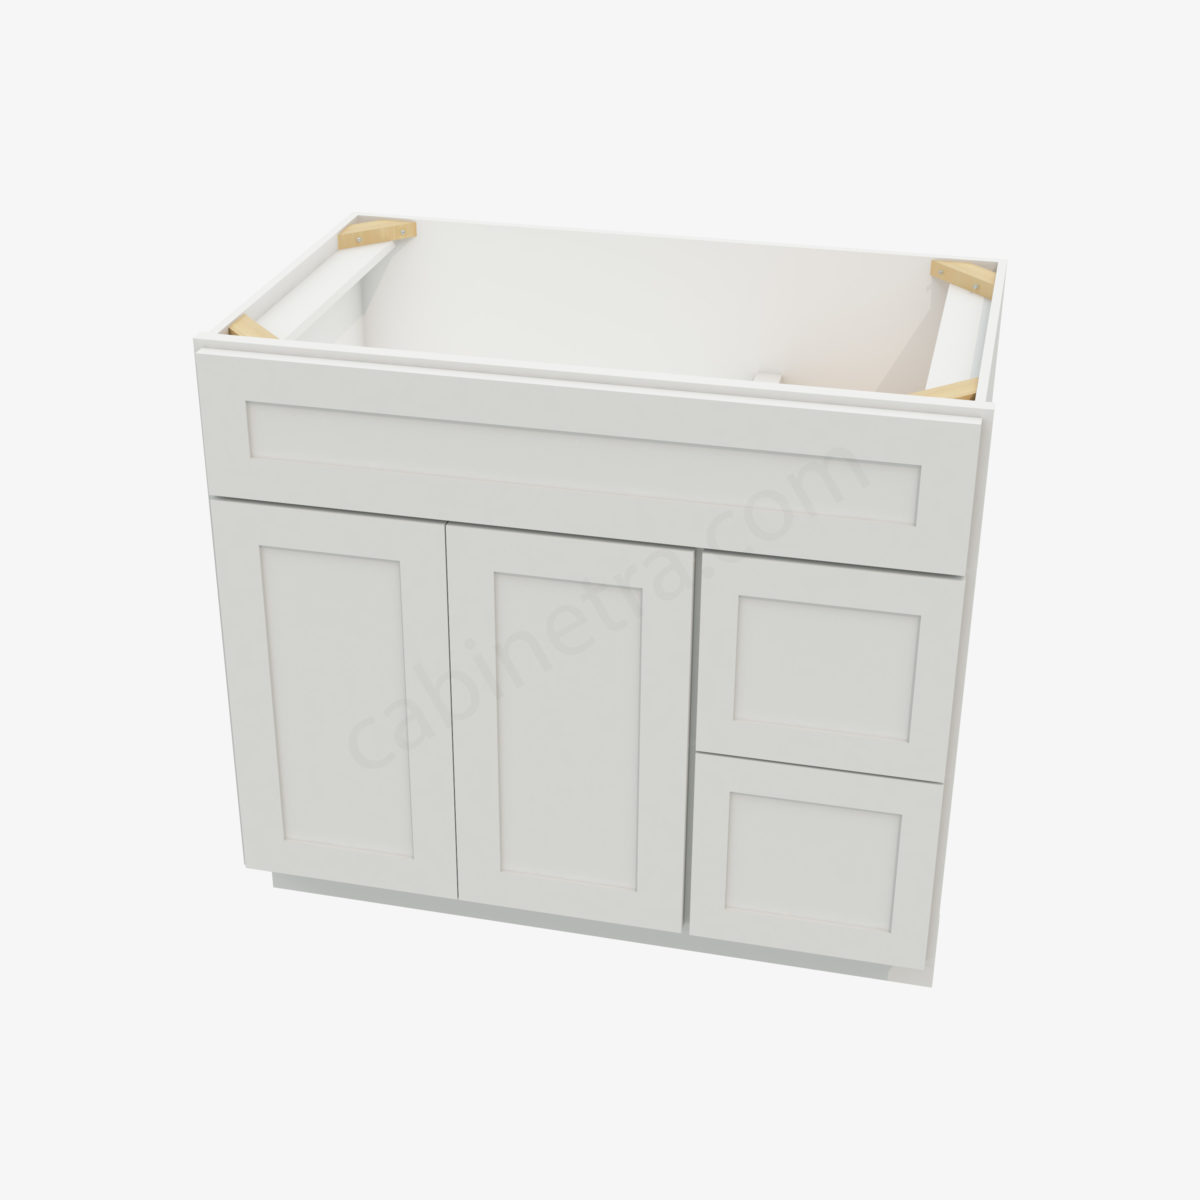 AW S3621BDR 34 3 Forevermark Ice White Shaker Cabinetra scaled